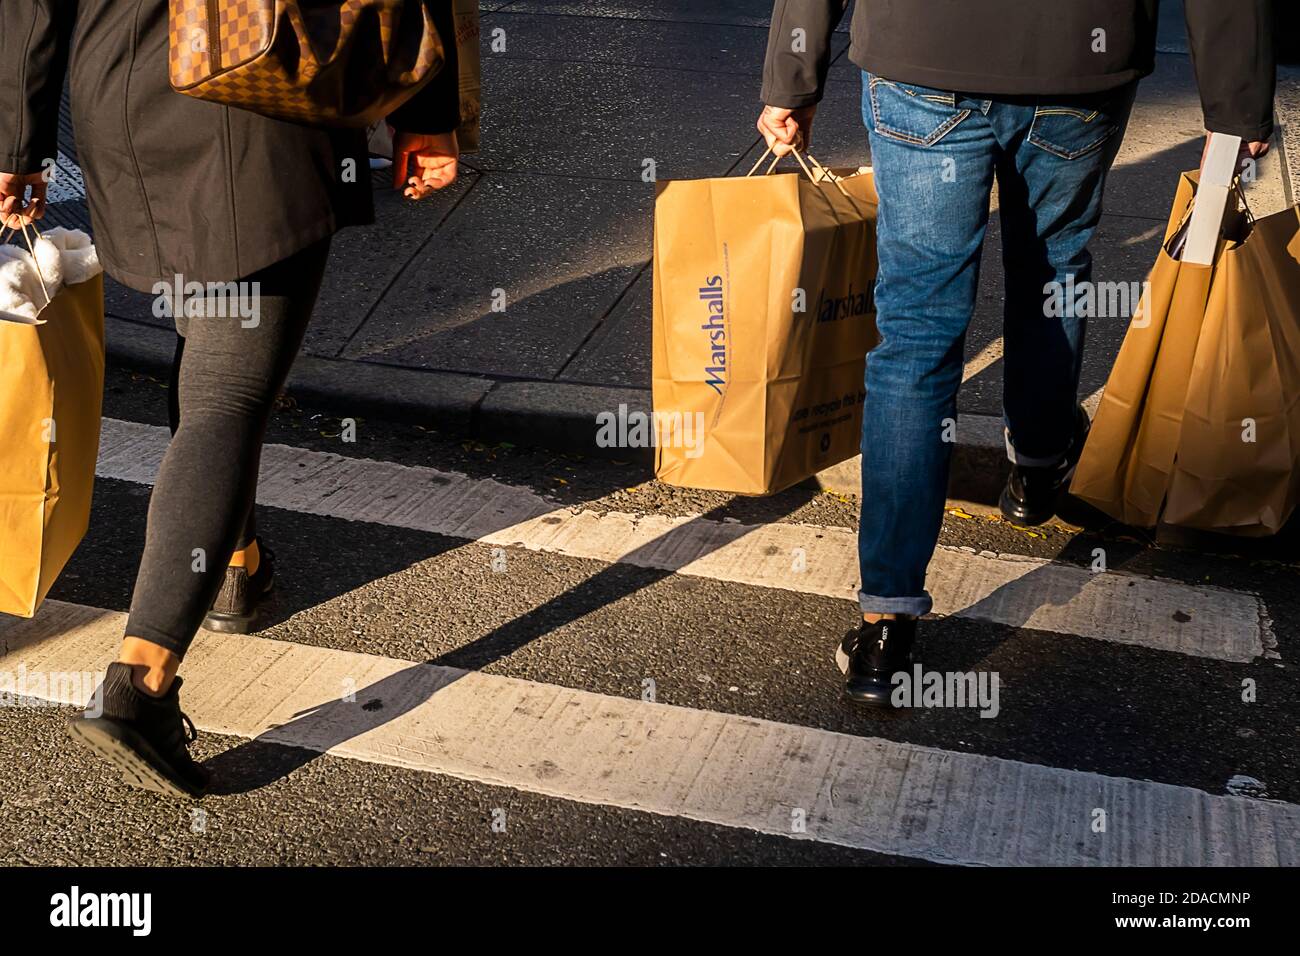 Shoppers exit the Marshalls store in Chelsea New York on Wednesday, November 4, 2020. (© Richard B. Levine) Stock Photo